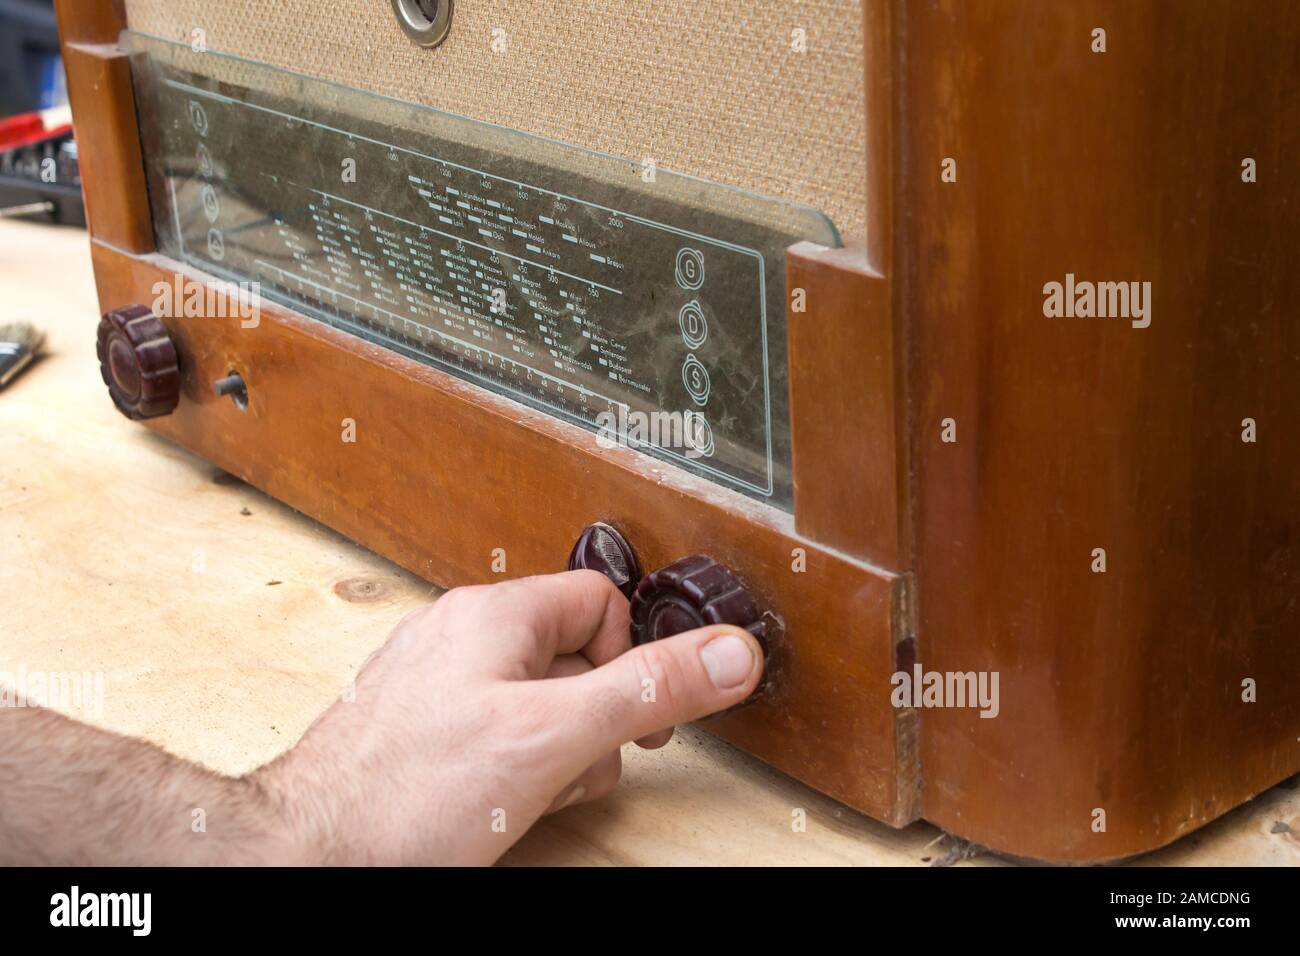 The man's hand adjusts the potentiometer scale in the old vintage radio tube. Stock Photo